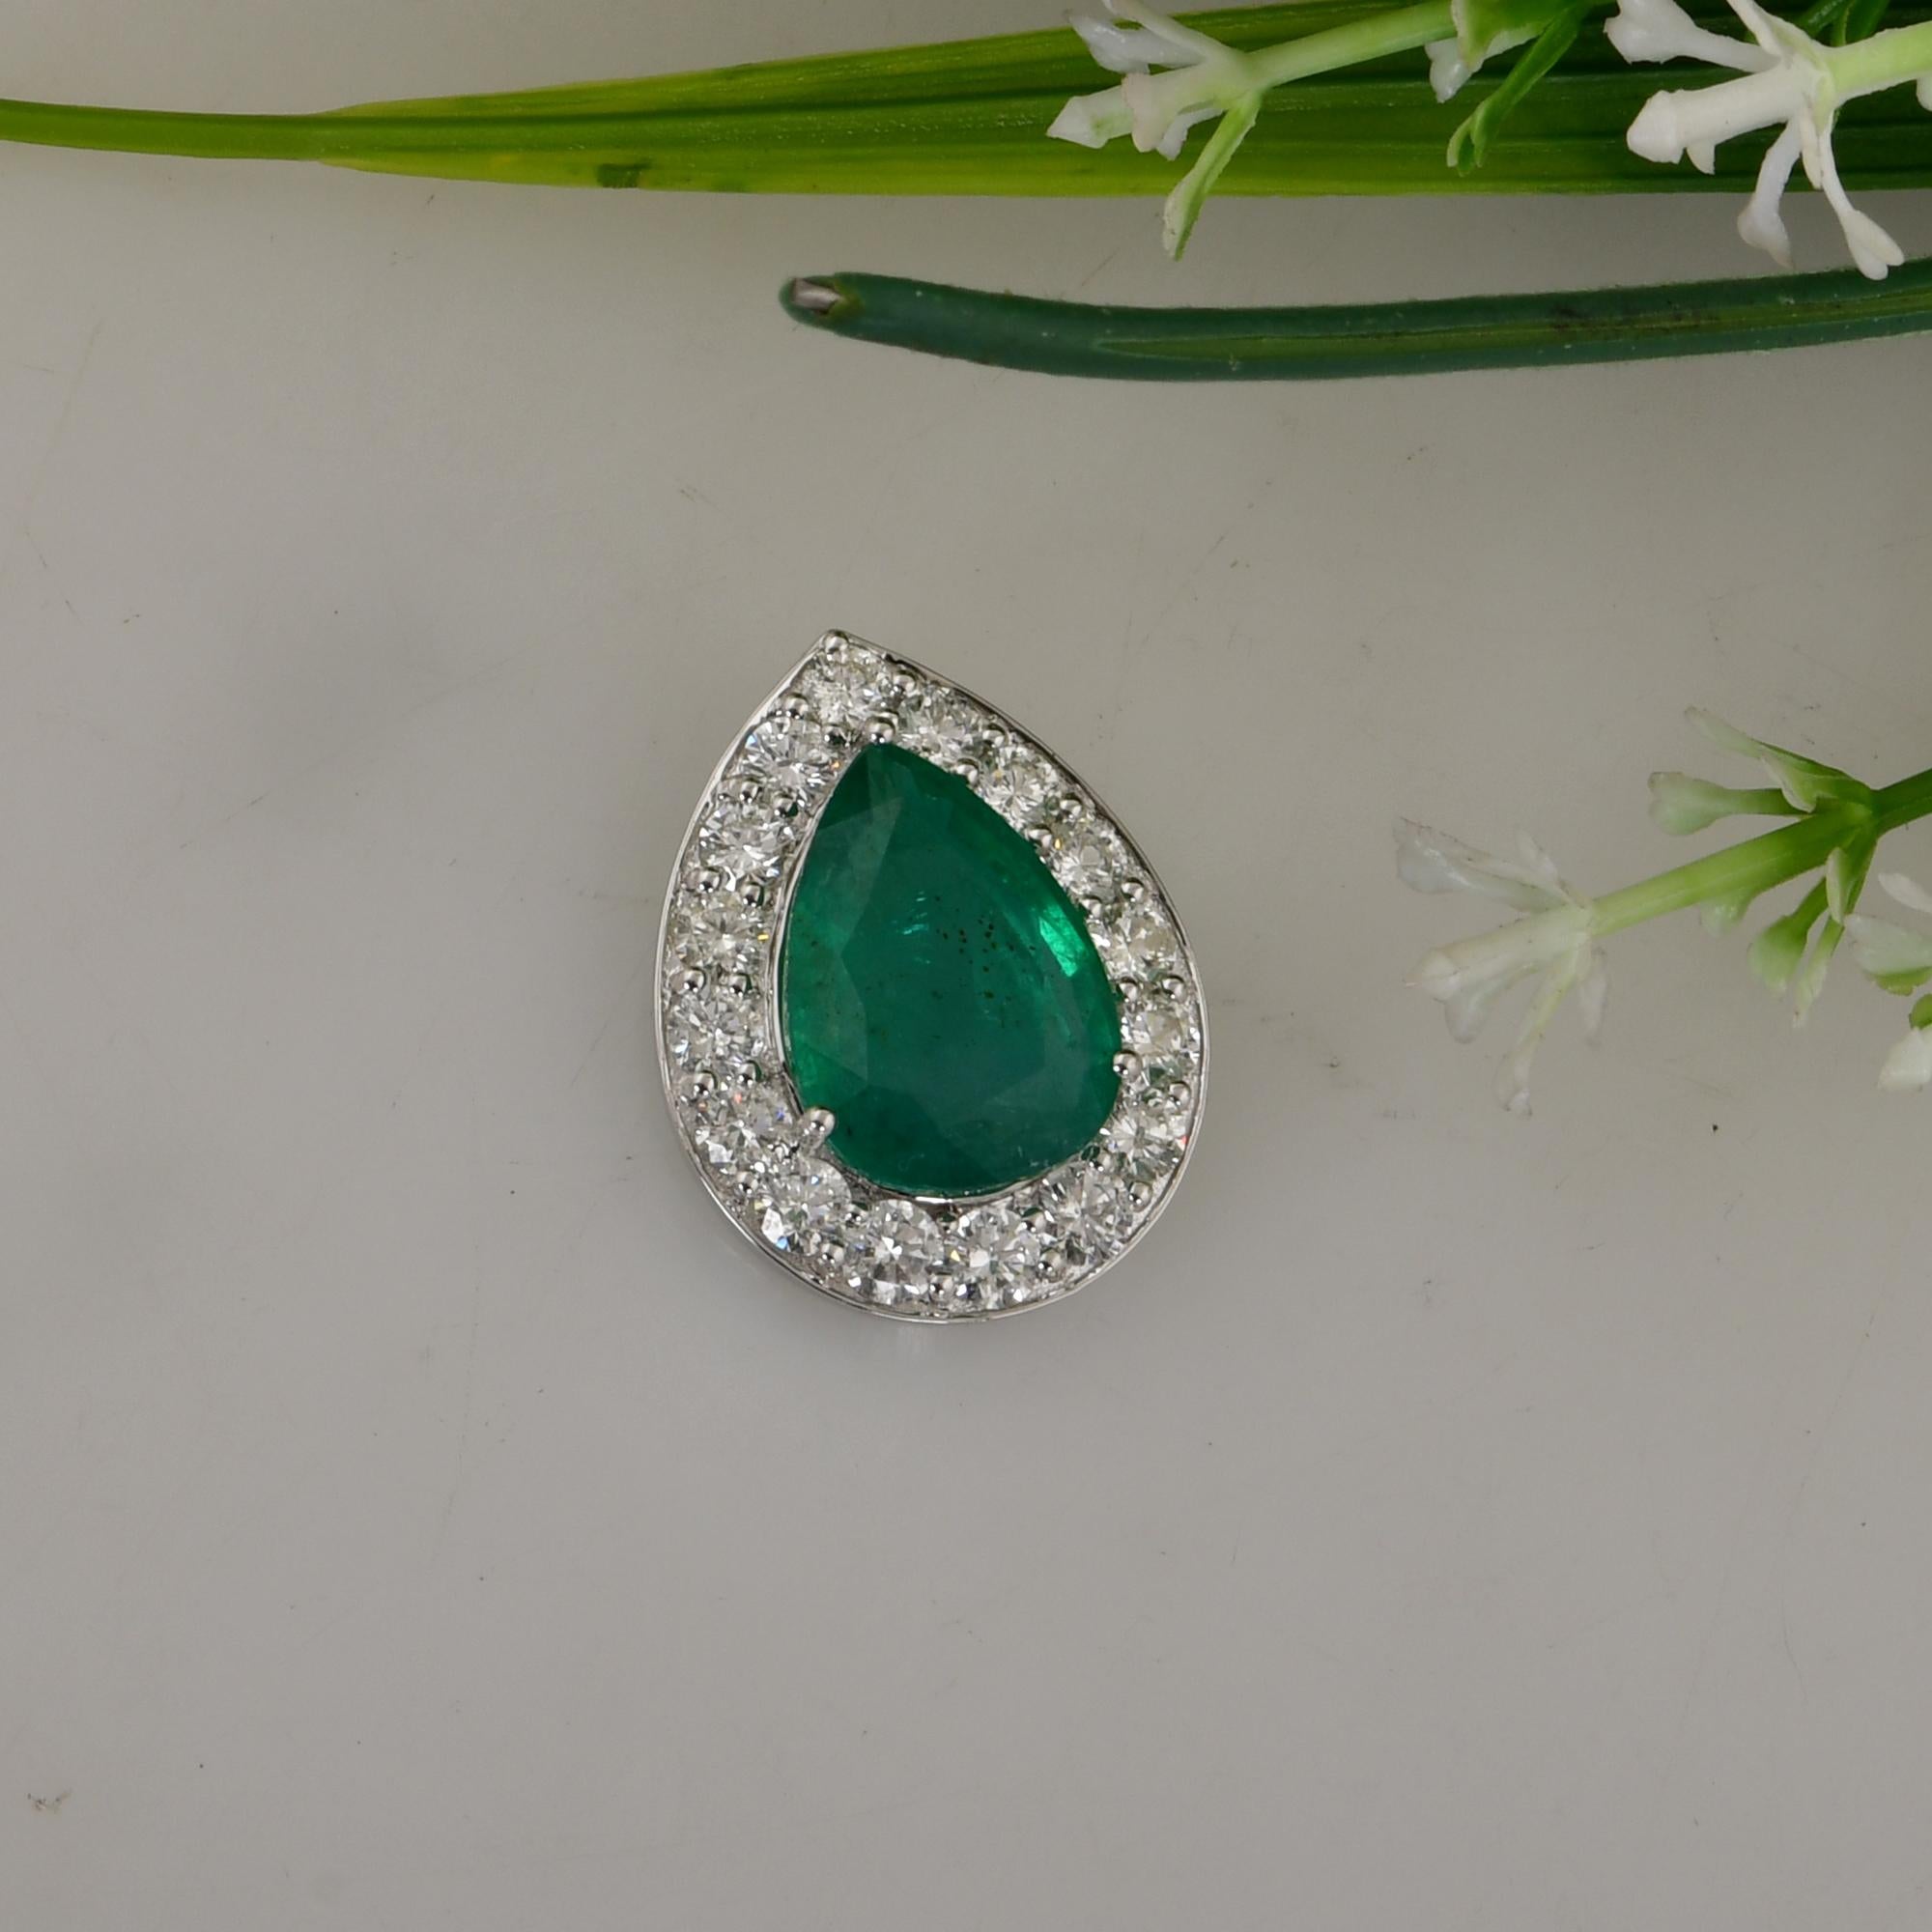 At the heart of this captivating pendant is a mesmerizing pear-shaped Zambian emerald, prized for its rich green hue and exceptional clarity. Sourced from the renowned mines of Zambia, this emerald possesses a natural beauty and allure that is truly